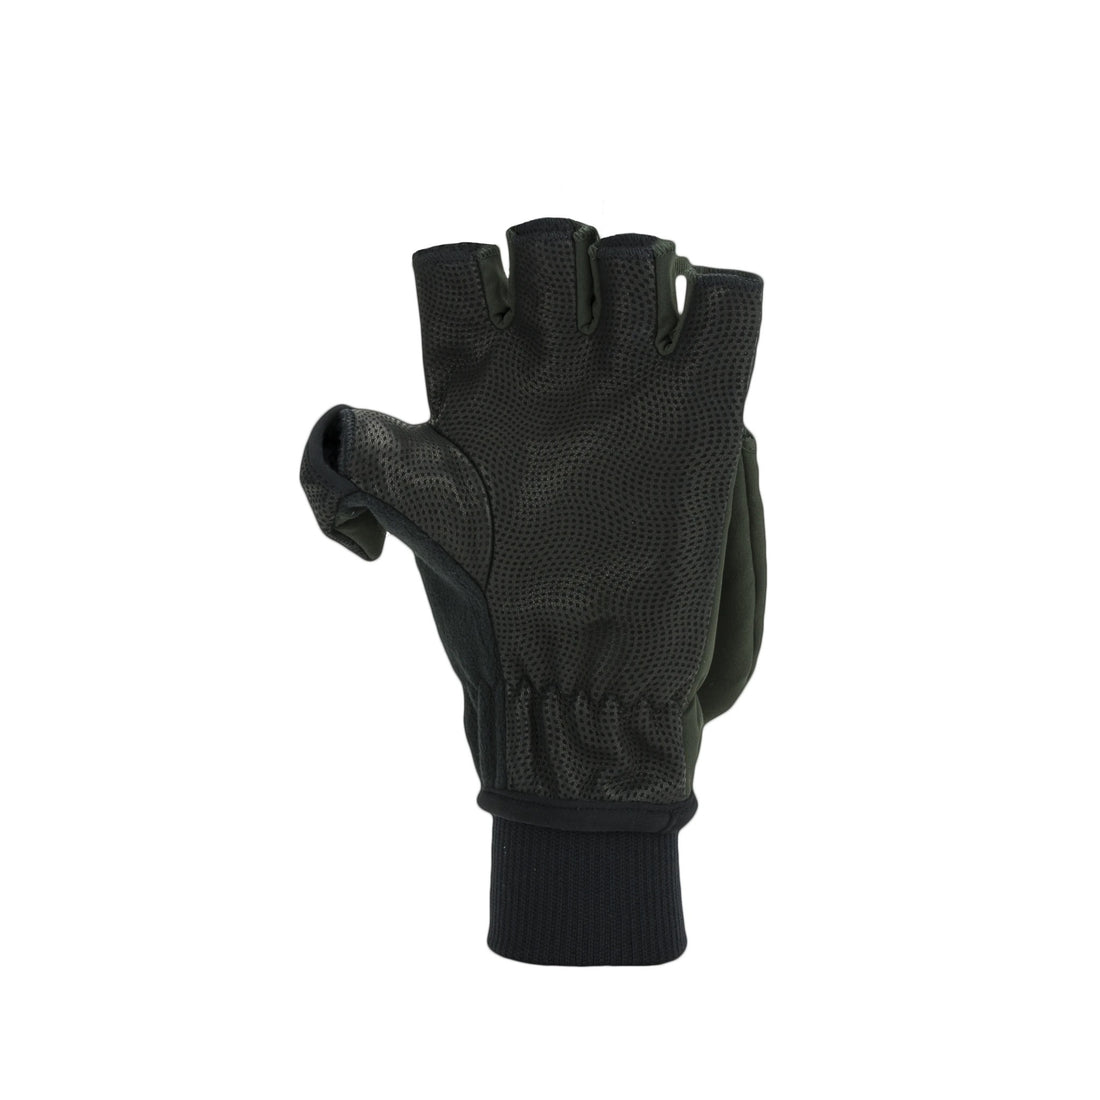 Windproof Cold Weather Convertible Mitt - Olive Green/Black